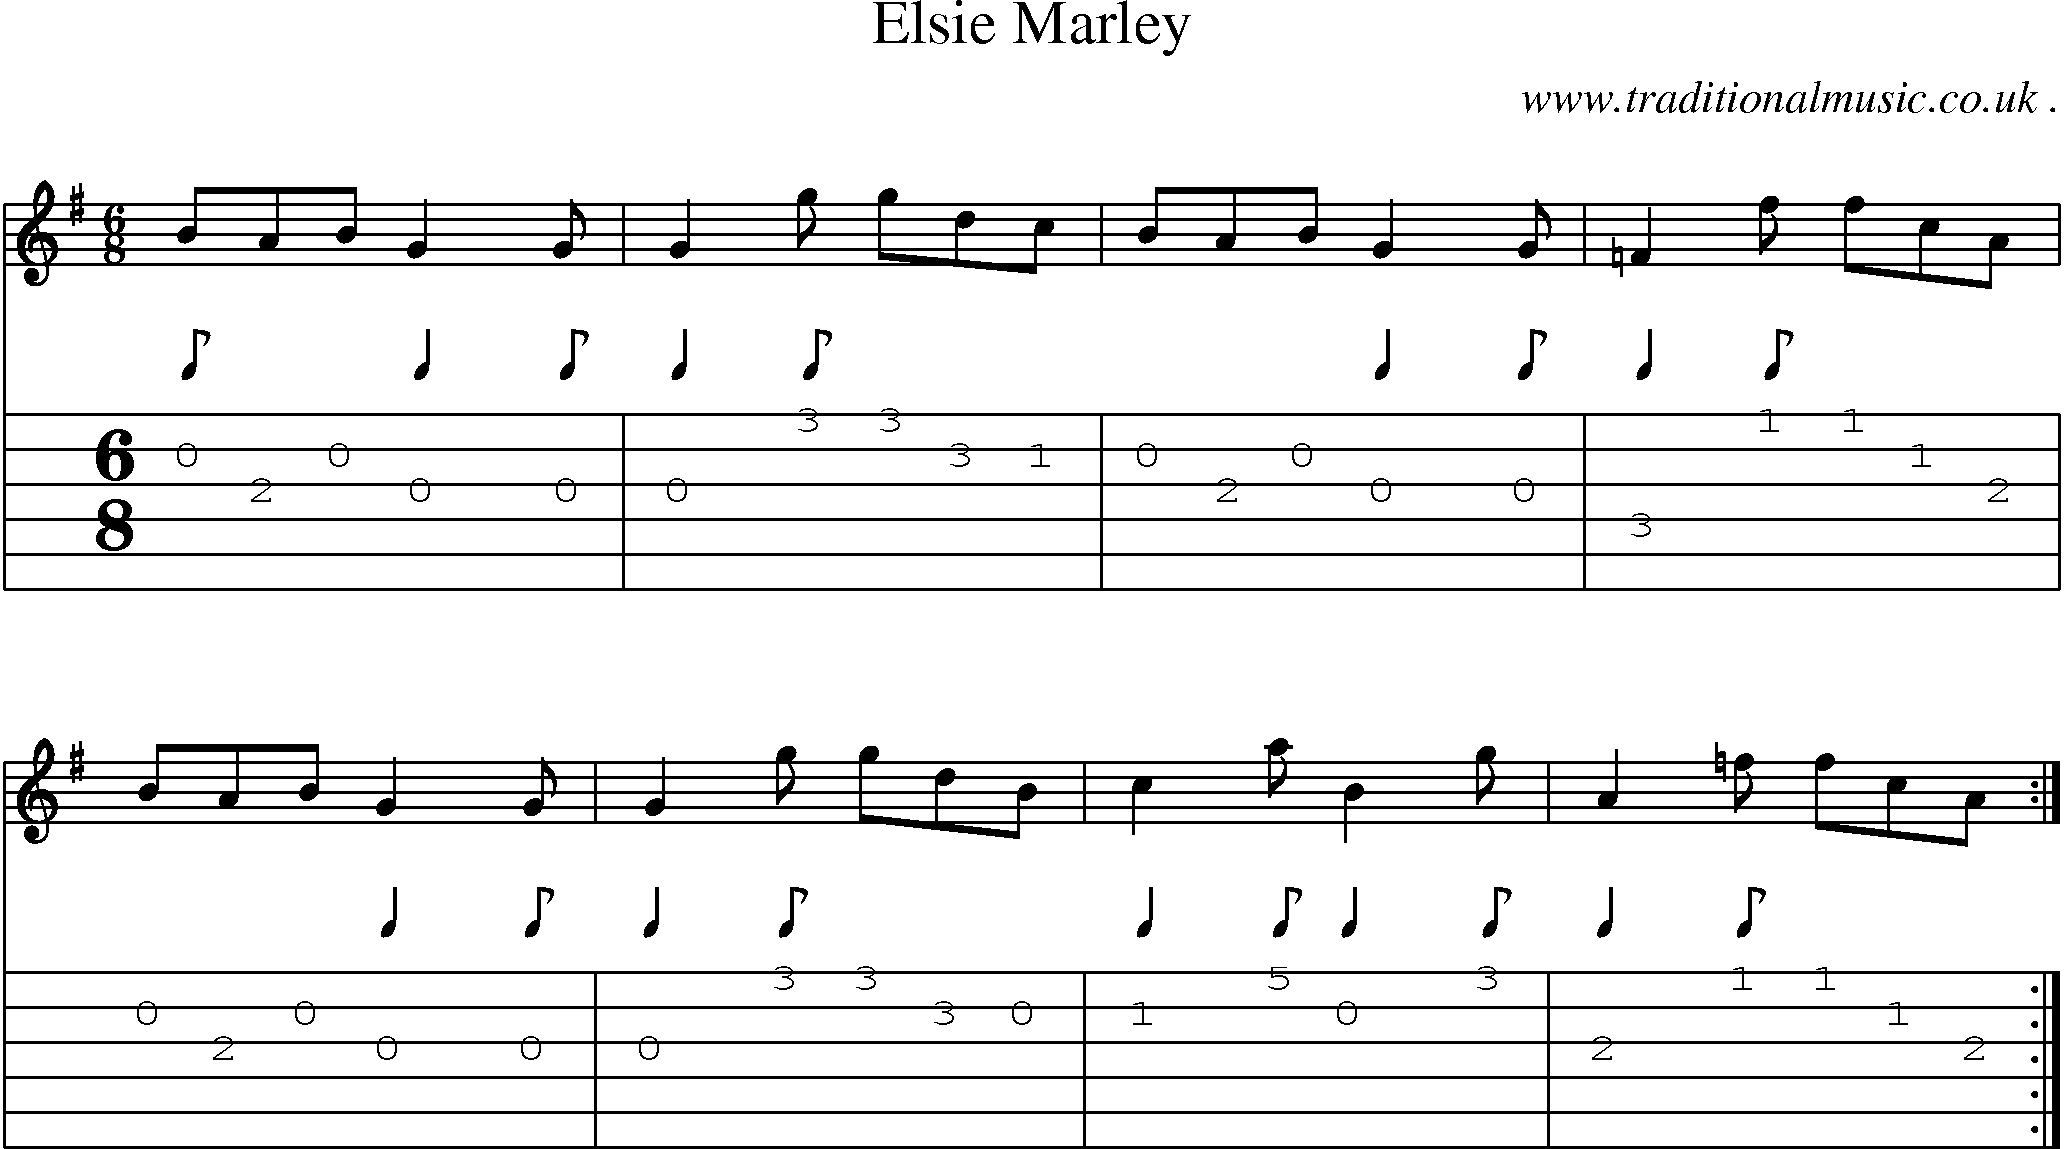 Sheet-music  score, Chords and Guitar Tabs for Elsie Marley